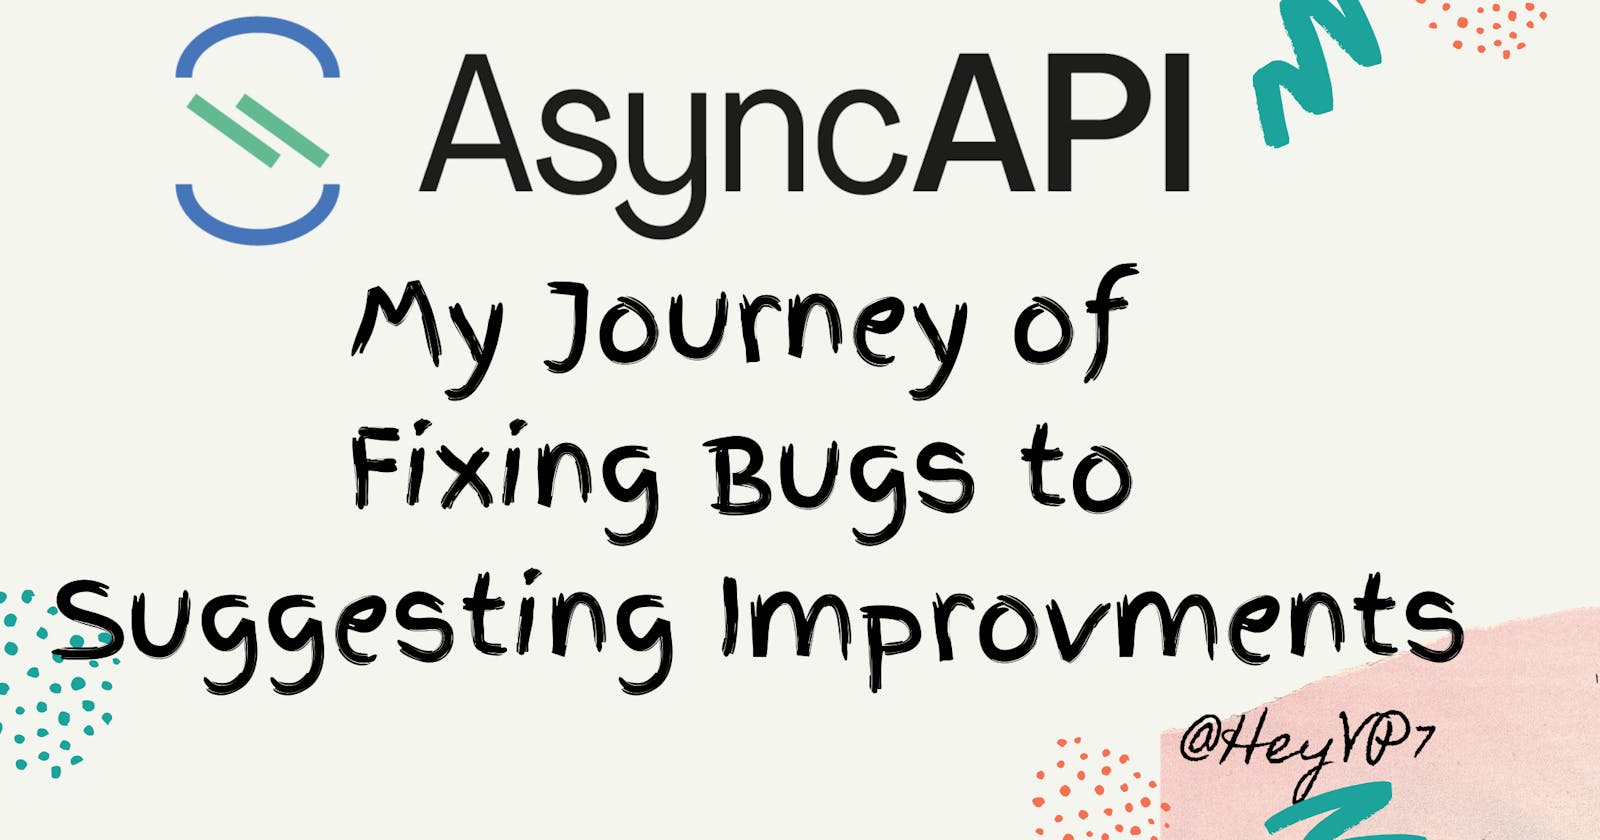 My first AsyncAPI contribution Journey